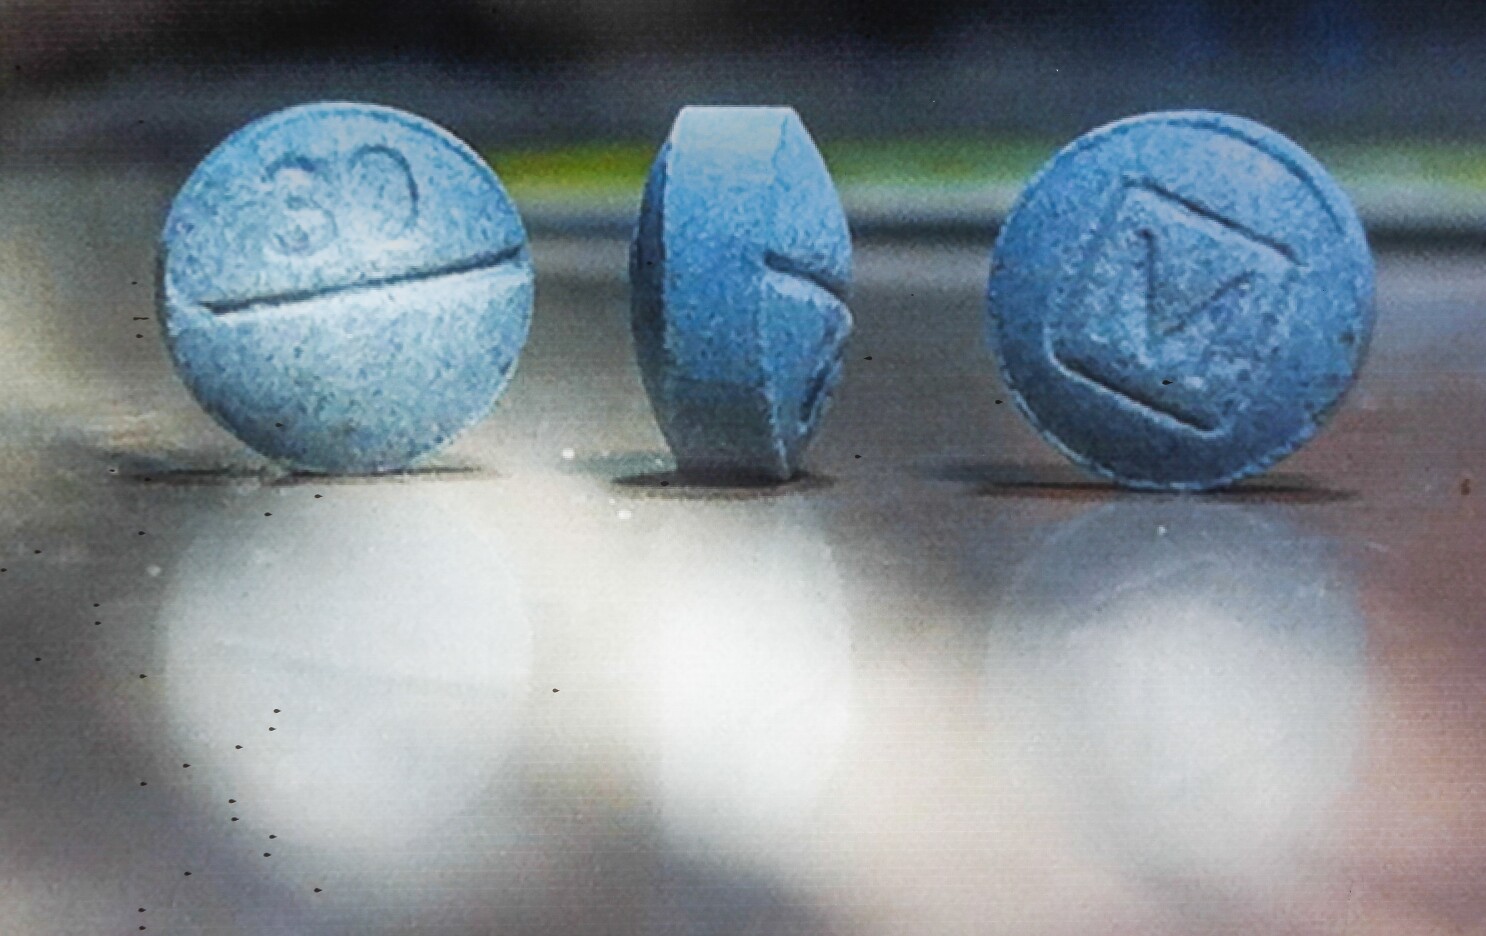 Blue pills being traded, sold in Diego County linked to 4 deaths, sheriff's officials warn - The San Diego Union-Tribune